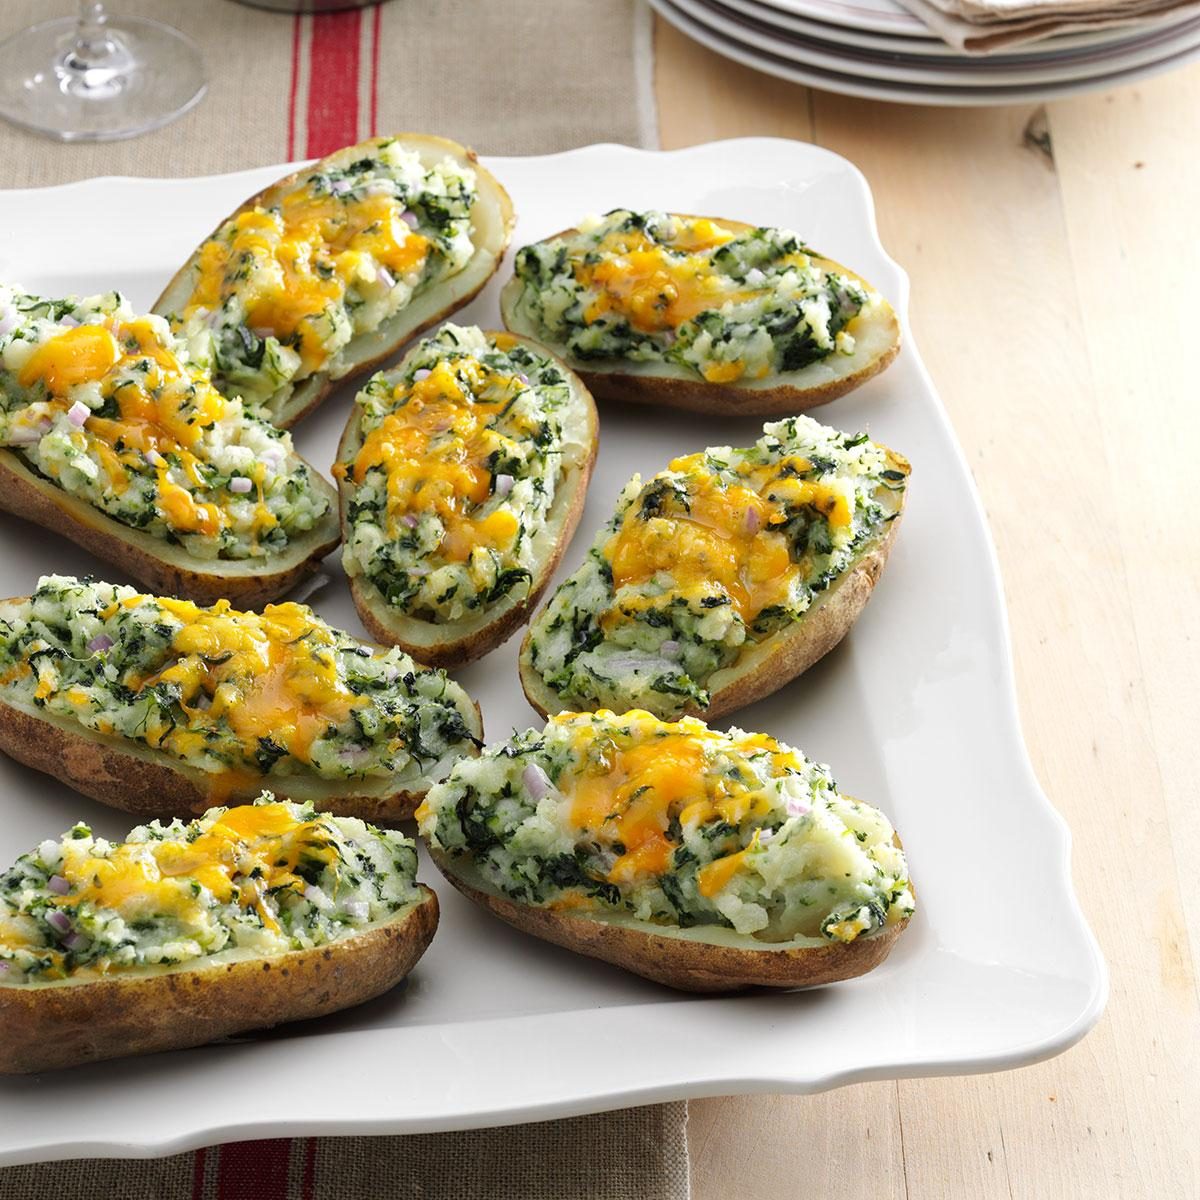 Cheddar & Spinach Twice-Baked Potatoes